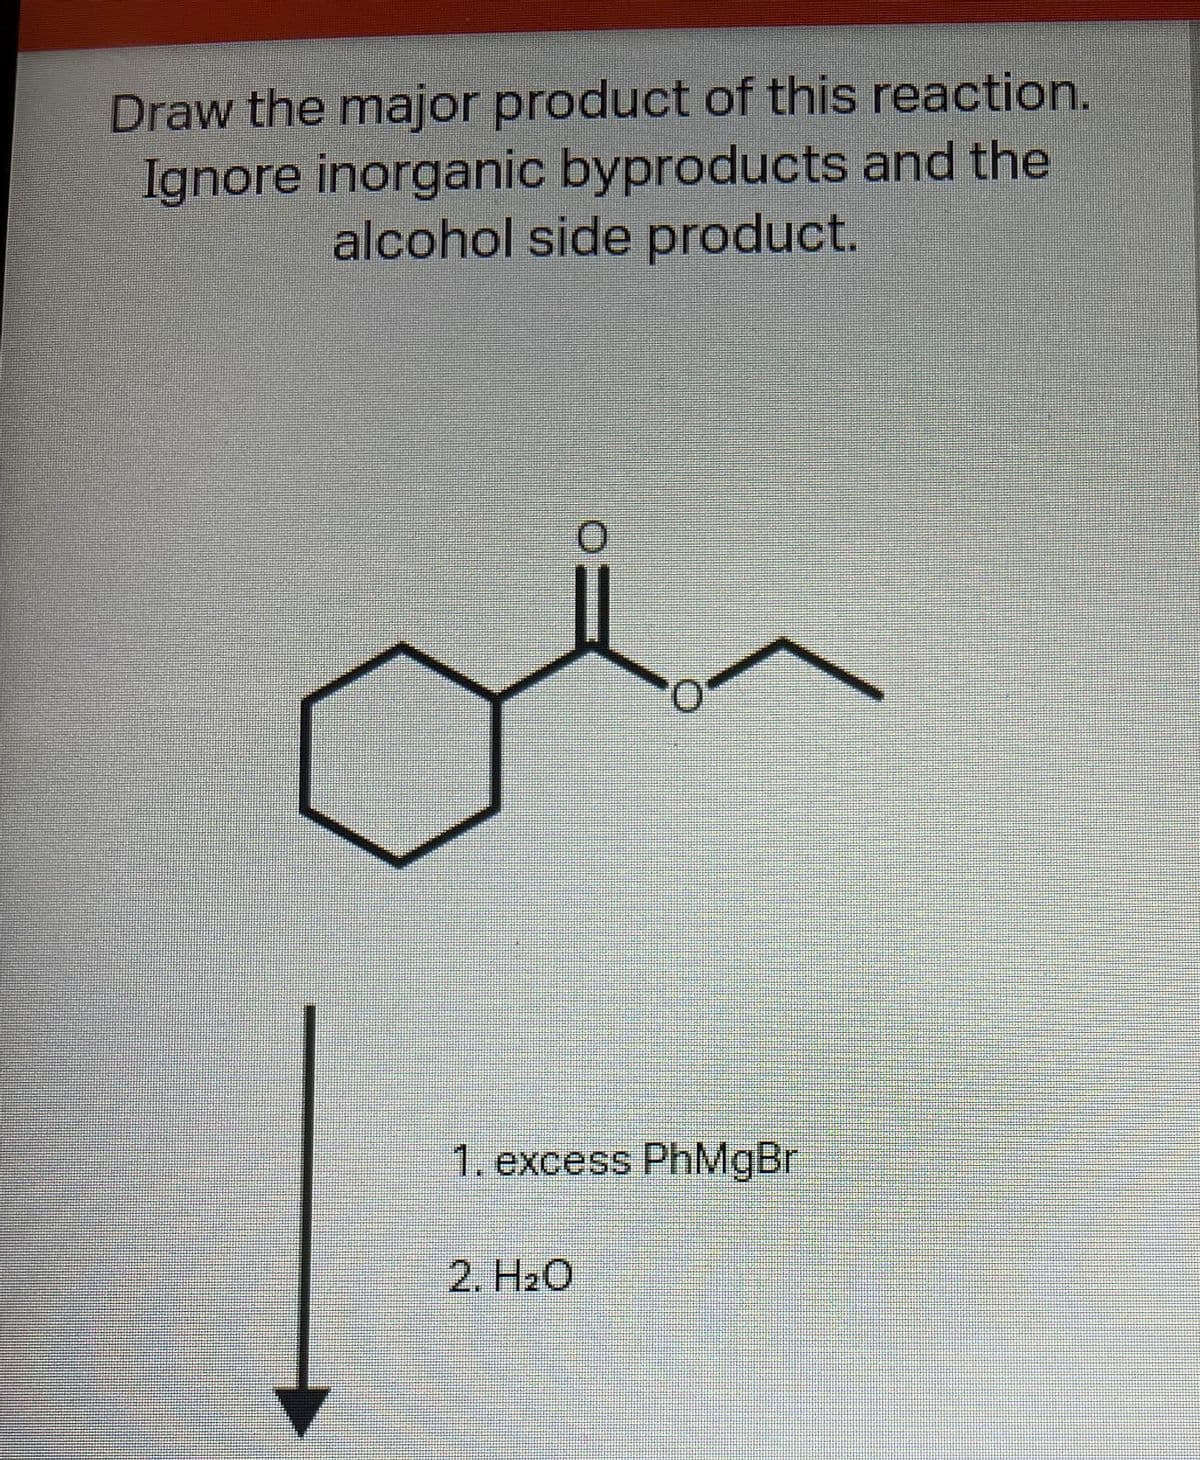 Draw the major product of this reaction.
Ignore inorganic byproducts and the
alcohol side product.
1. excess PhMgBr
2. H20
